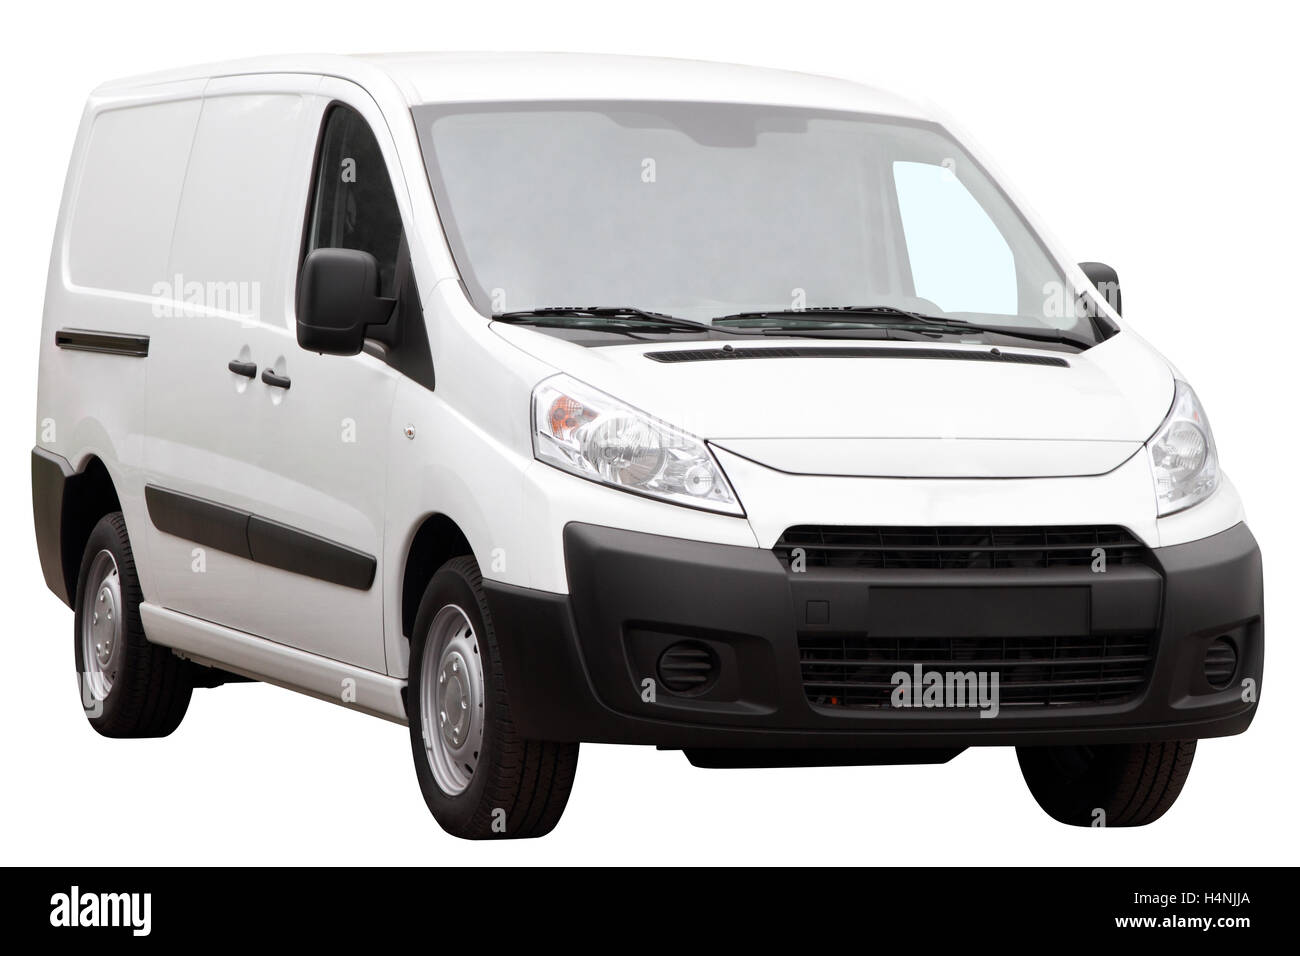 Small compact minivan isolated on a white background. Stock Photo